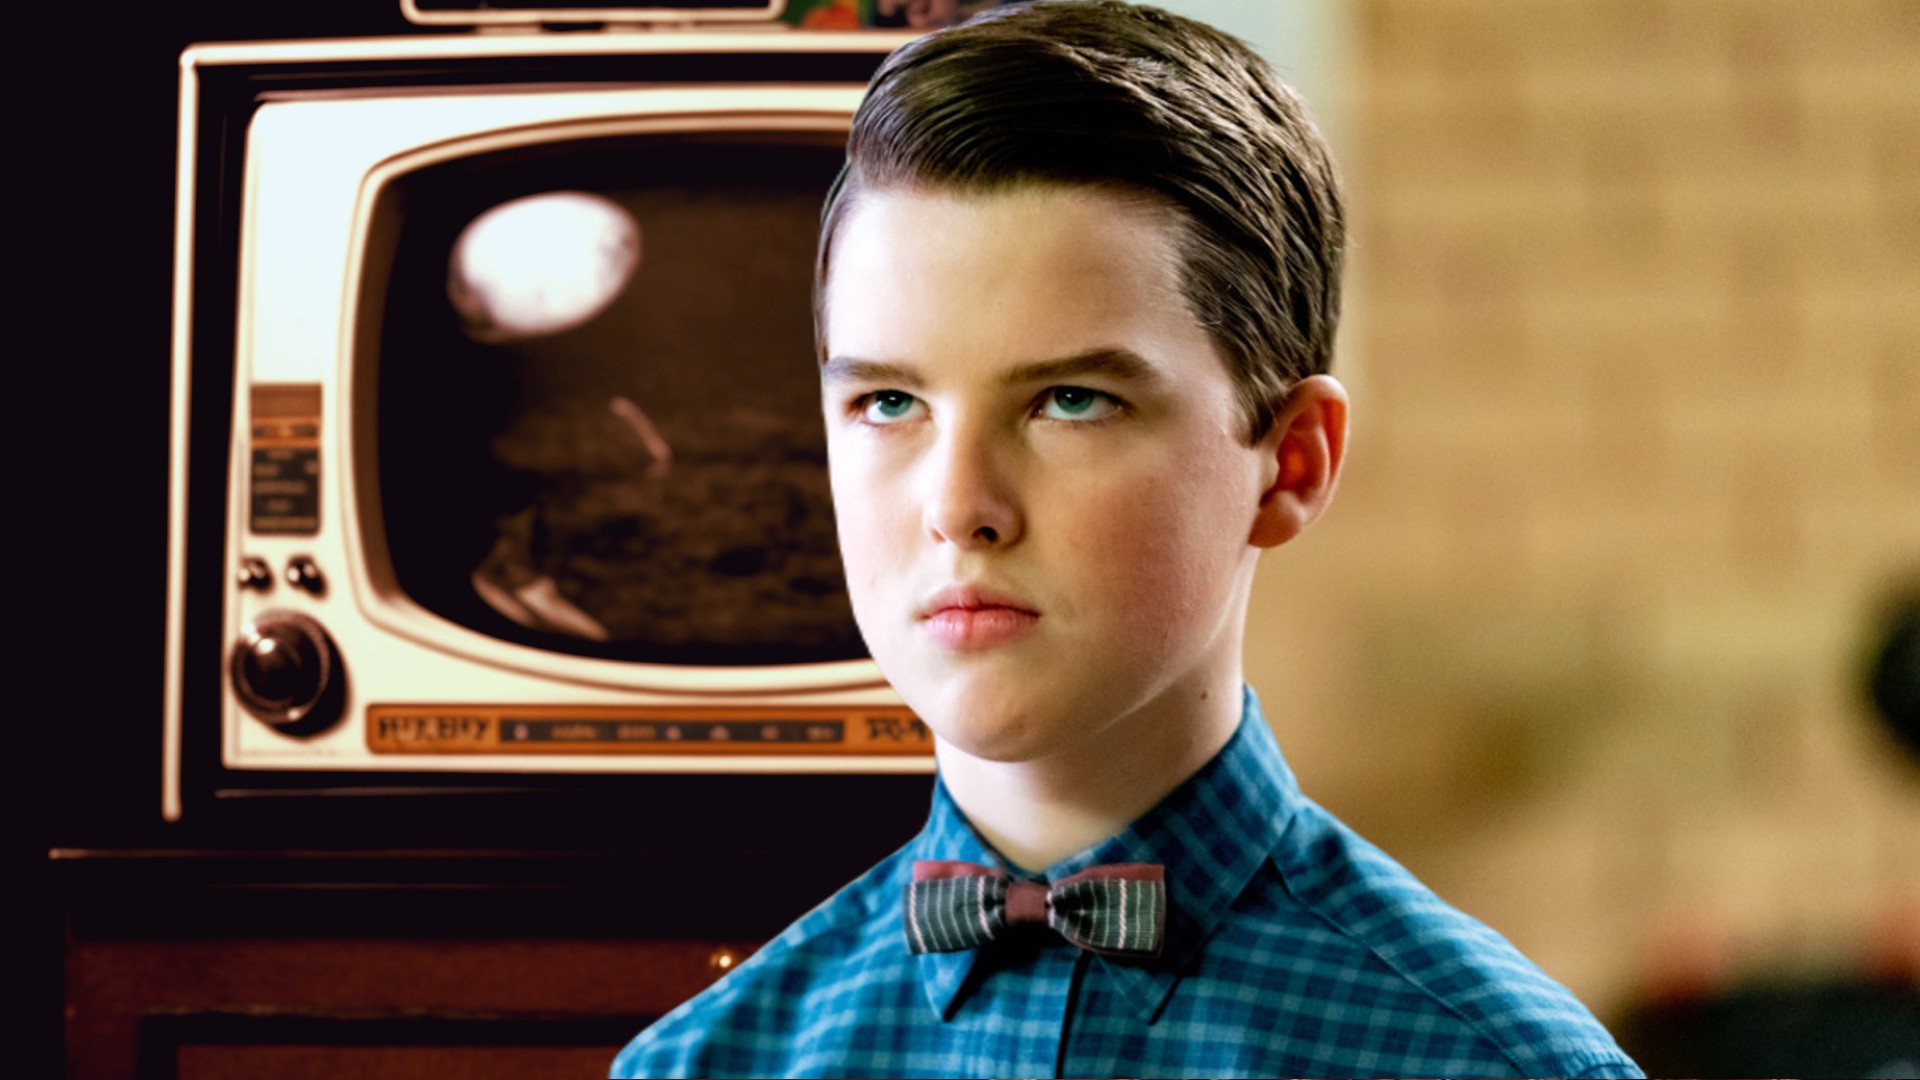 This Piece of 90s Technology Got Young Sheldon Fans All Confused